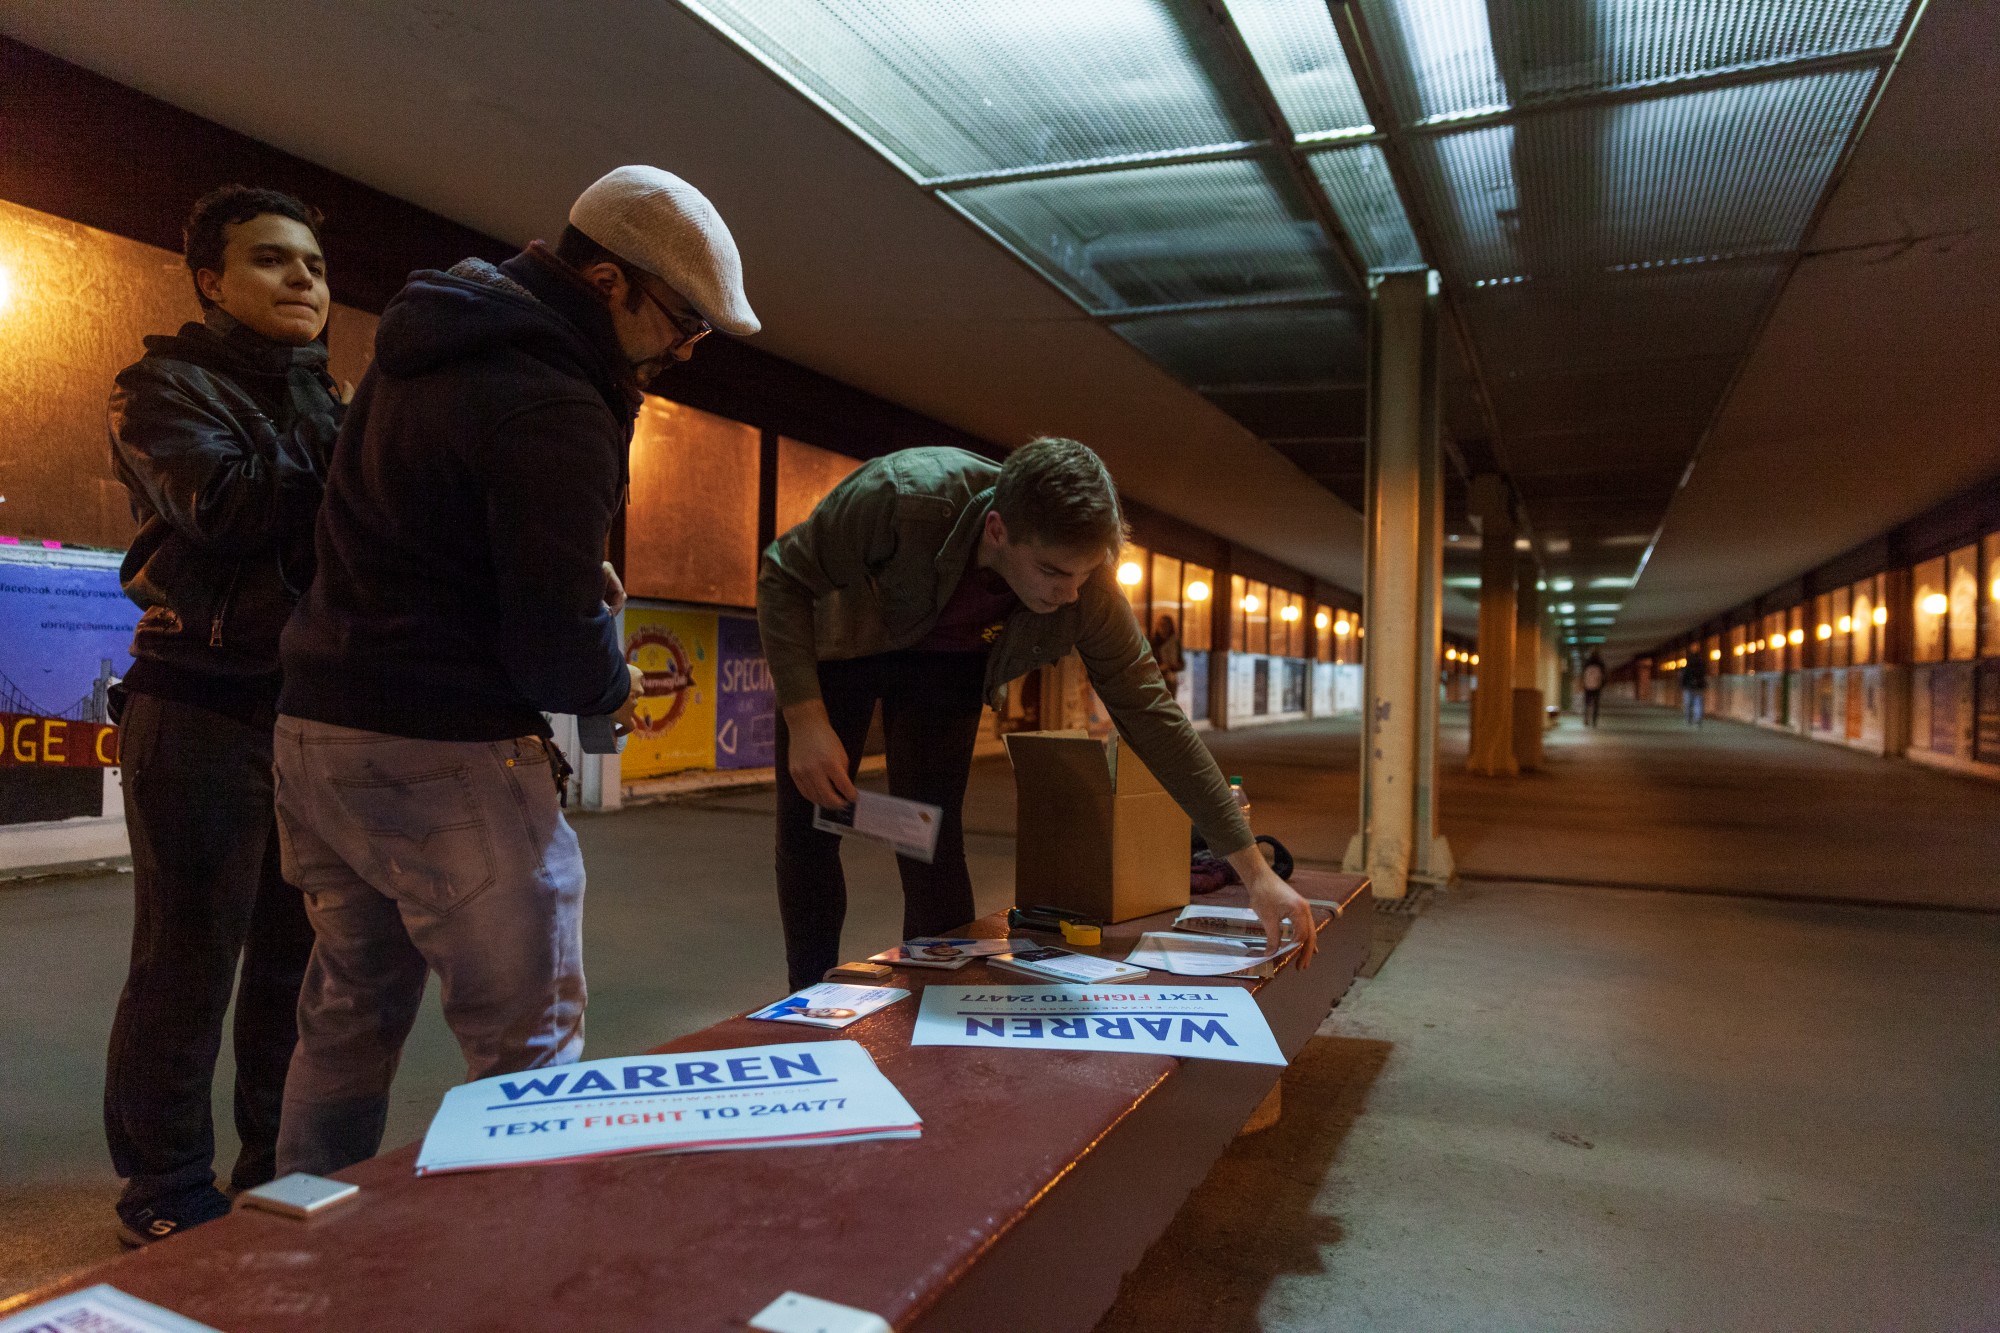 Sophomore Zach Mundt prepares to hang posters in support of Democratic presidential candidate Sen. Elizabeth Warren on the East Bank on Monday, March 2, before Super Tuesday.